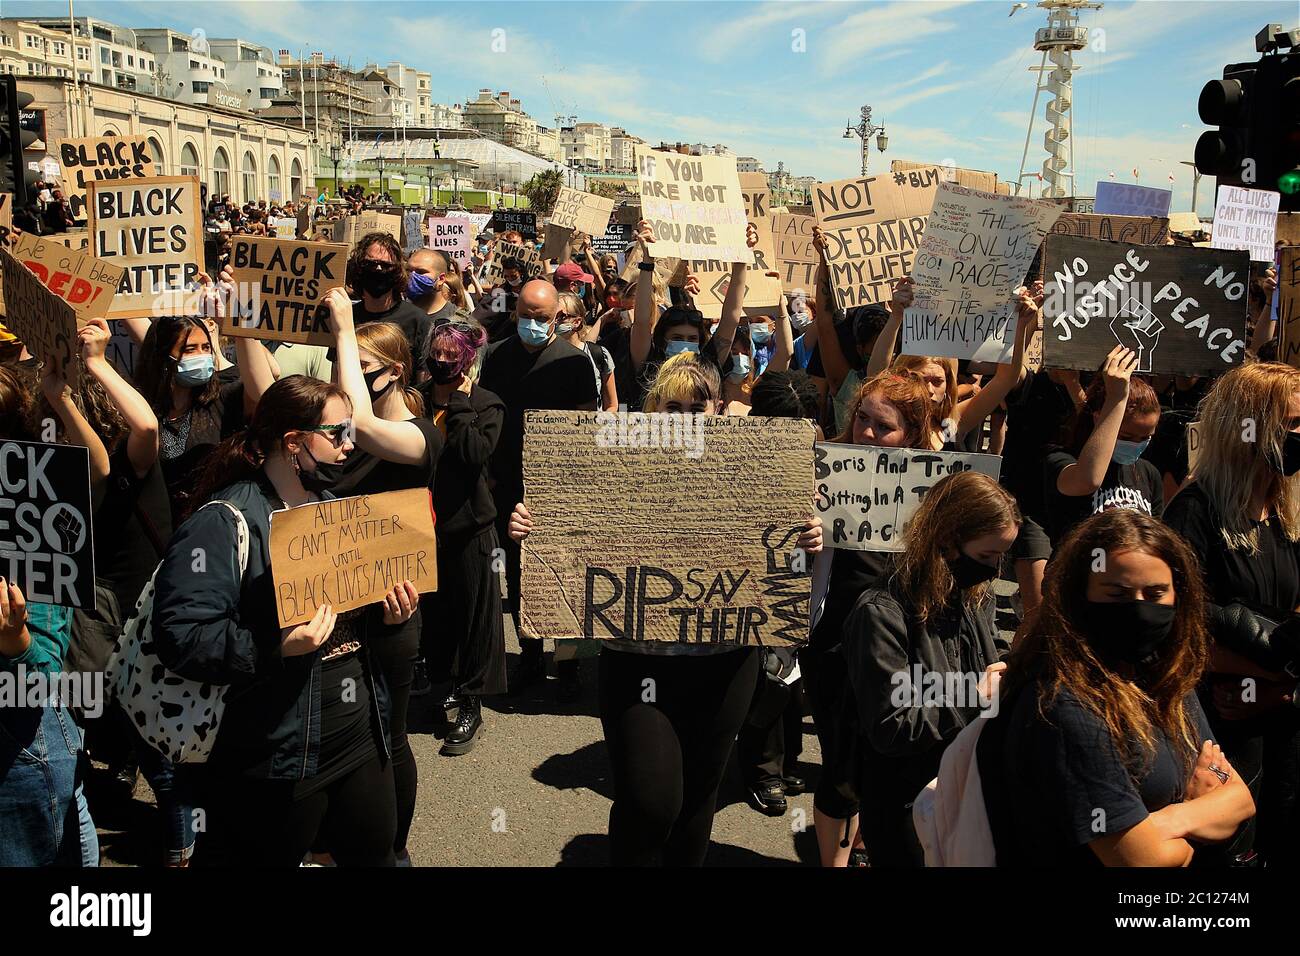 Brighton, UK. 13th June, 2020. The Black Lives Matter Silent Protest on Madeira Drive on Brighton Seafront followed by a march through the City. Credit: Rupert Rivett/Alamy Live News Stock Photo